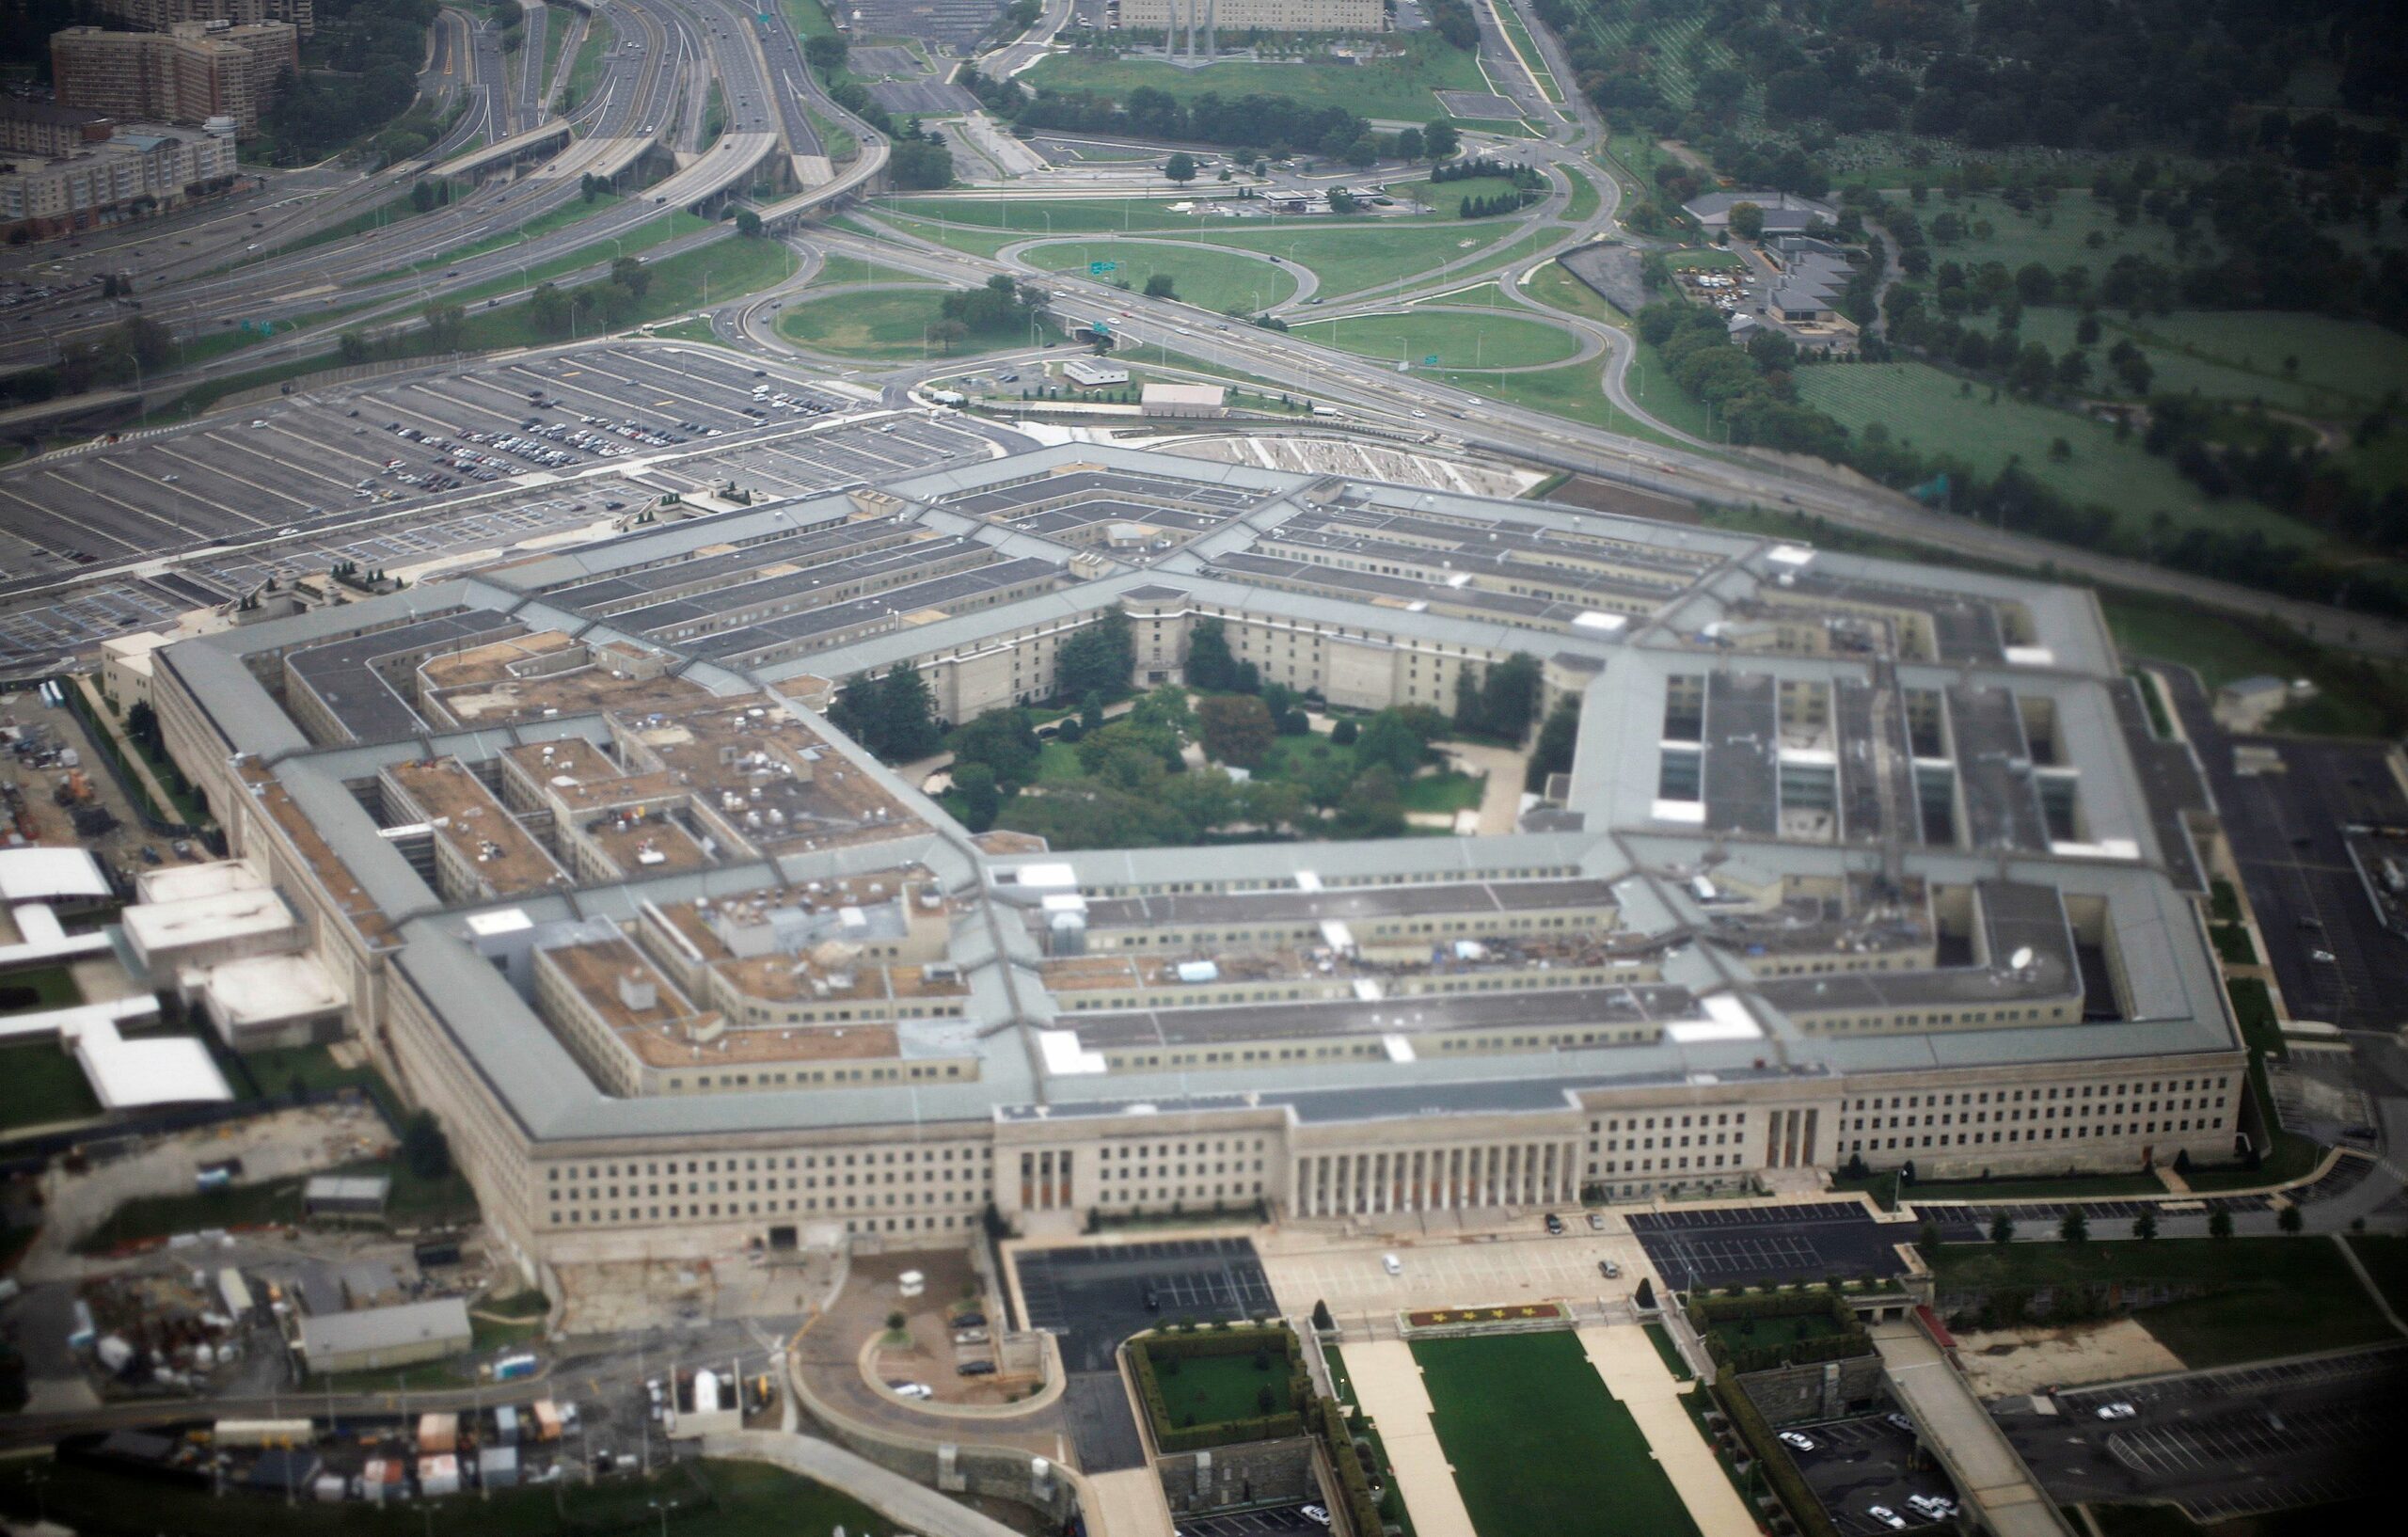 Why the Pentagon failed another audit